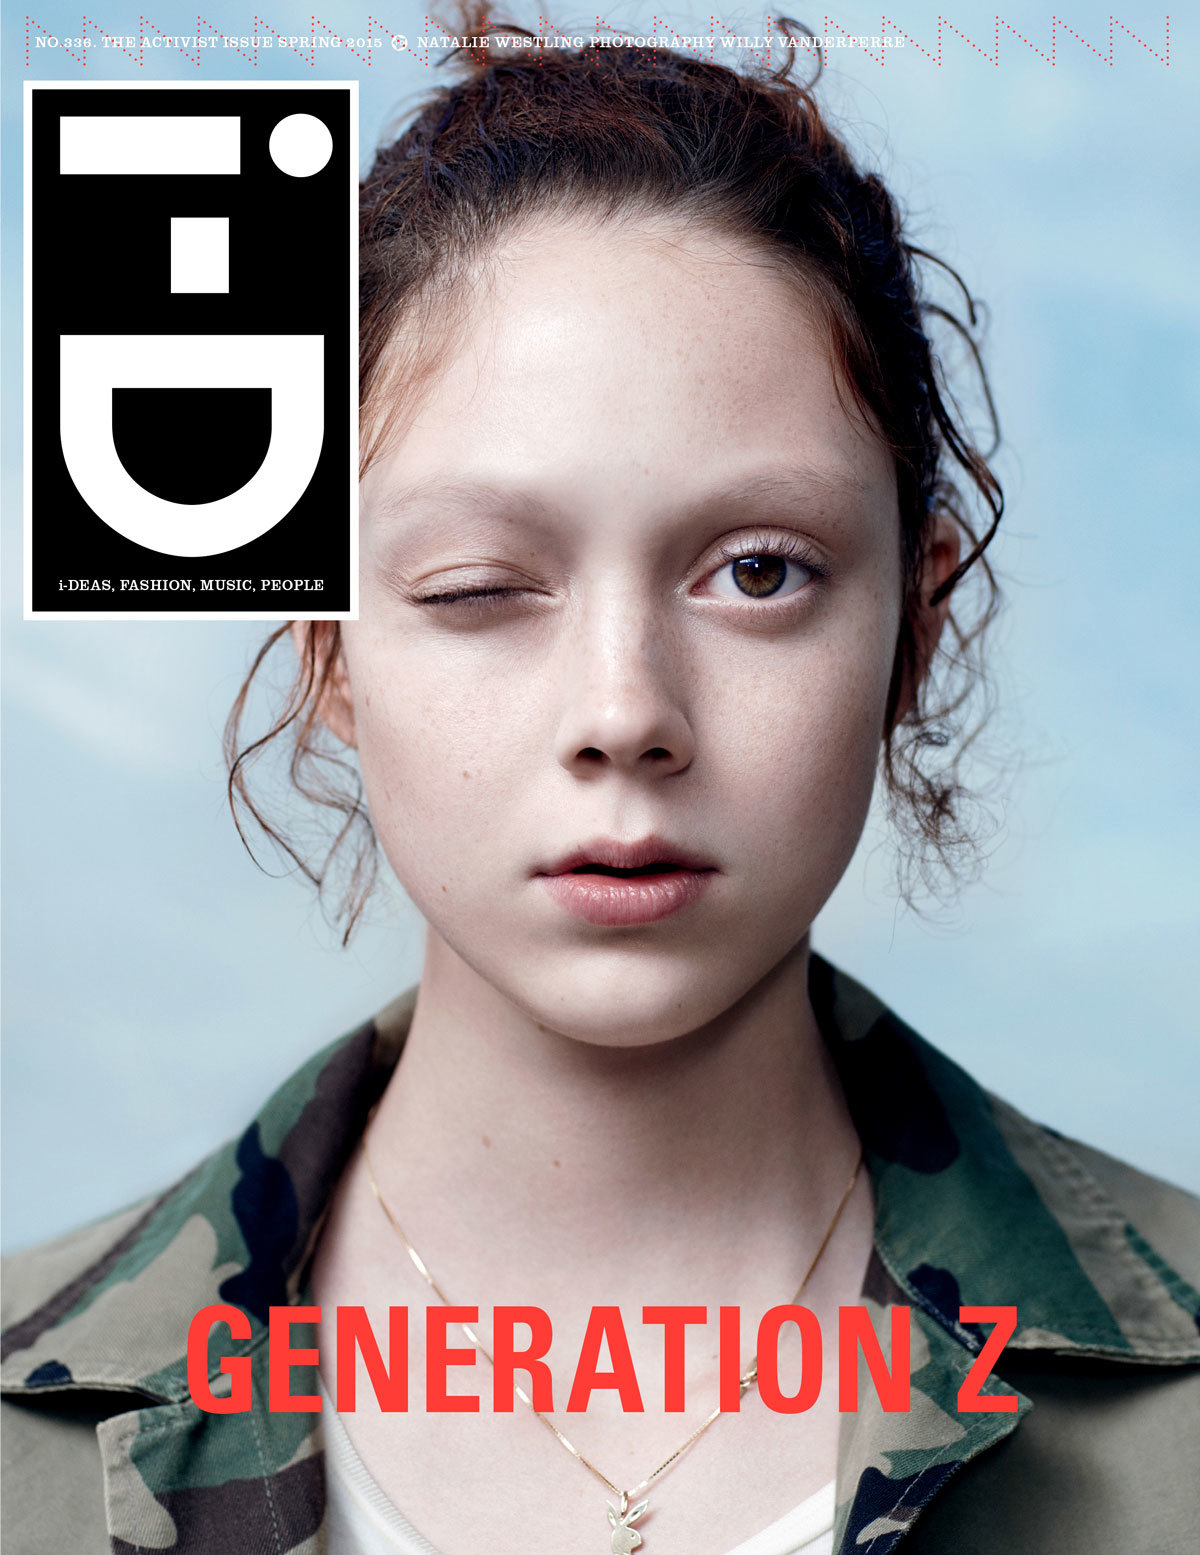 Peek inside the spring issue of i-D, dedicated to Generation Z and the creatives using their platform to promote positive change in the world. What do you stand for?